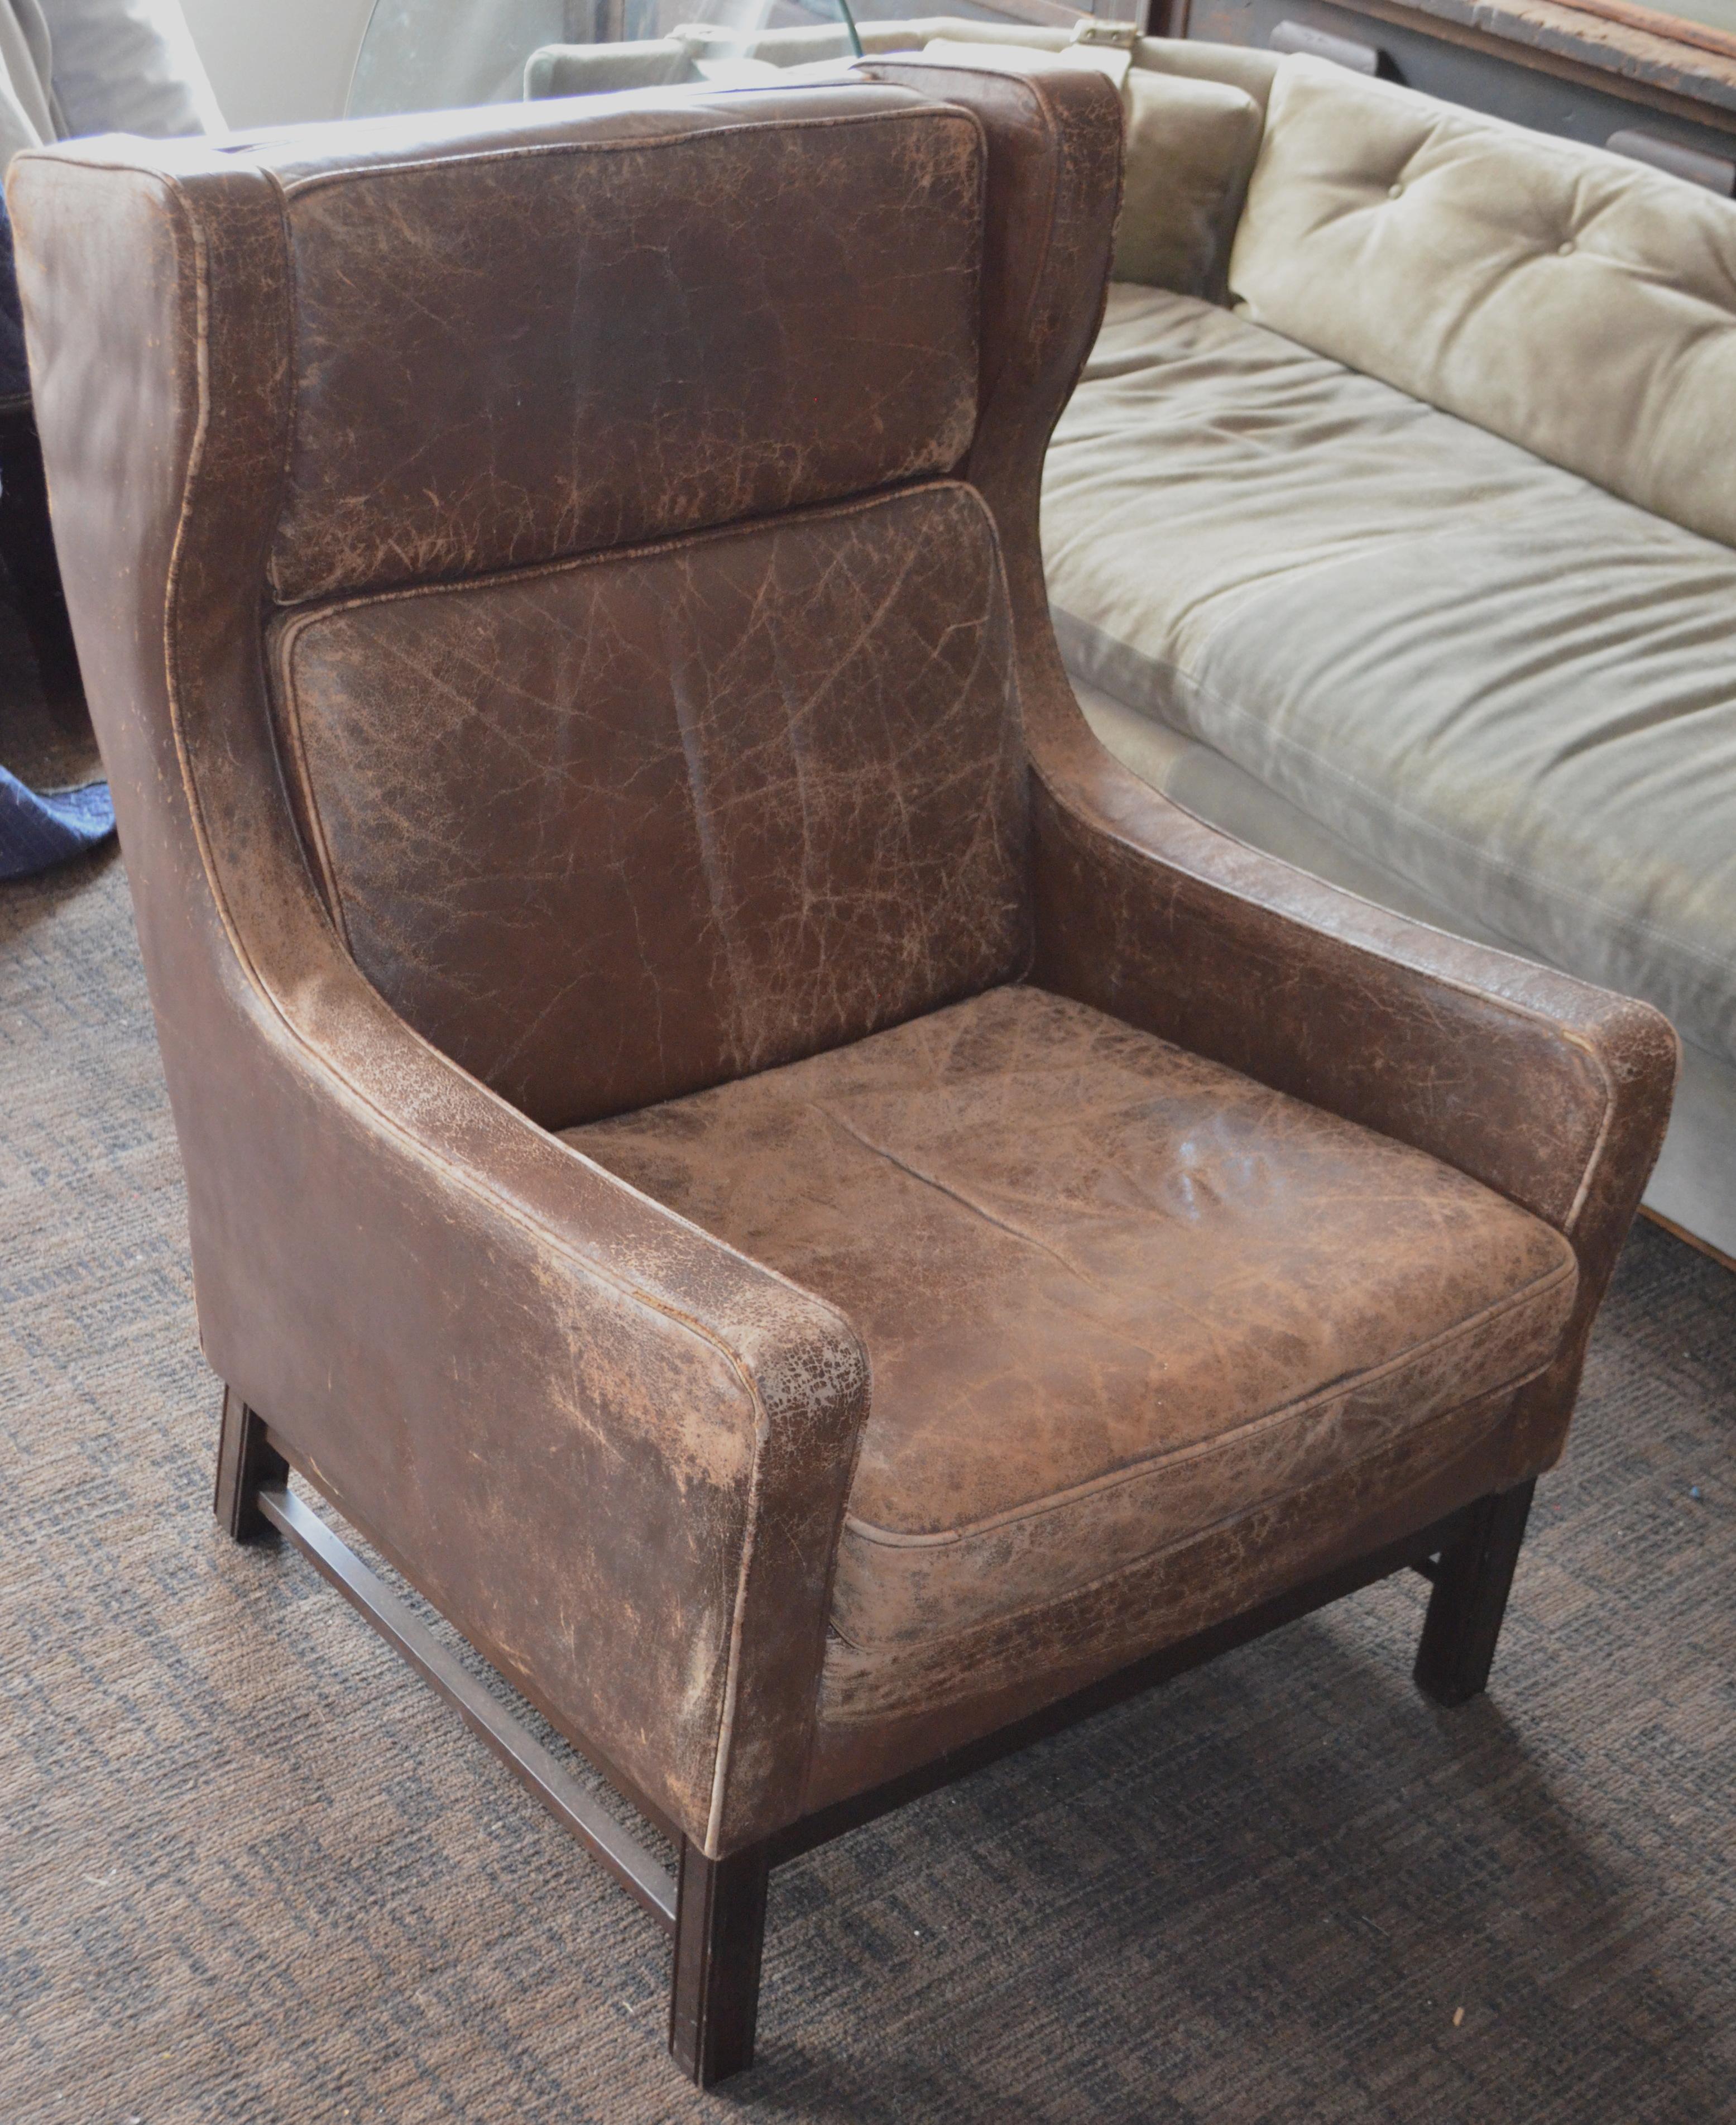 English Club Chair of Worn Leather from Edwardian England, Wingback, Early 20th Century For Sale